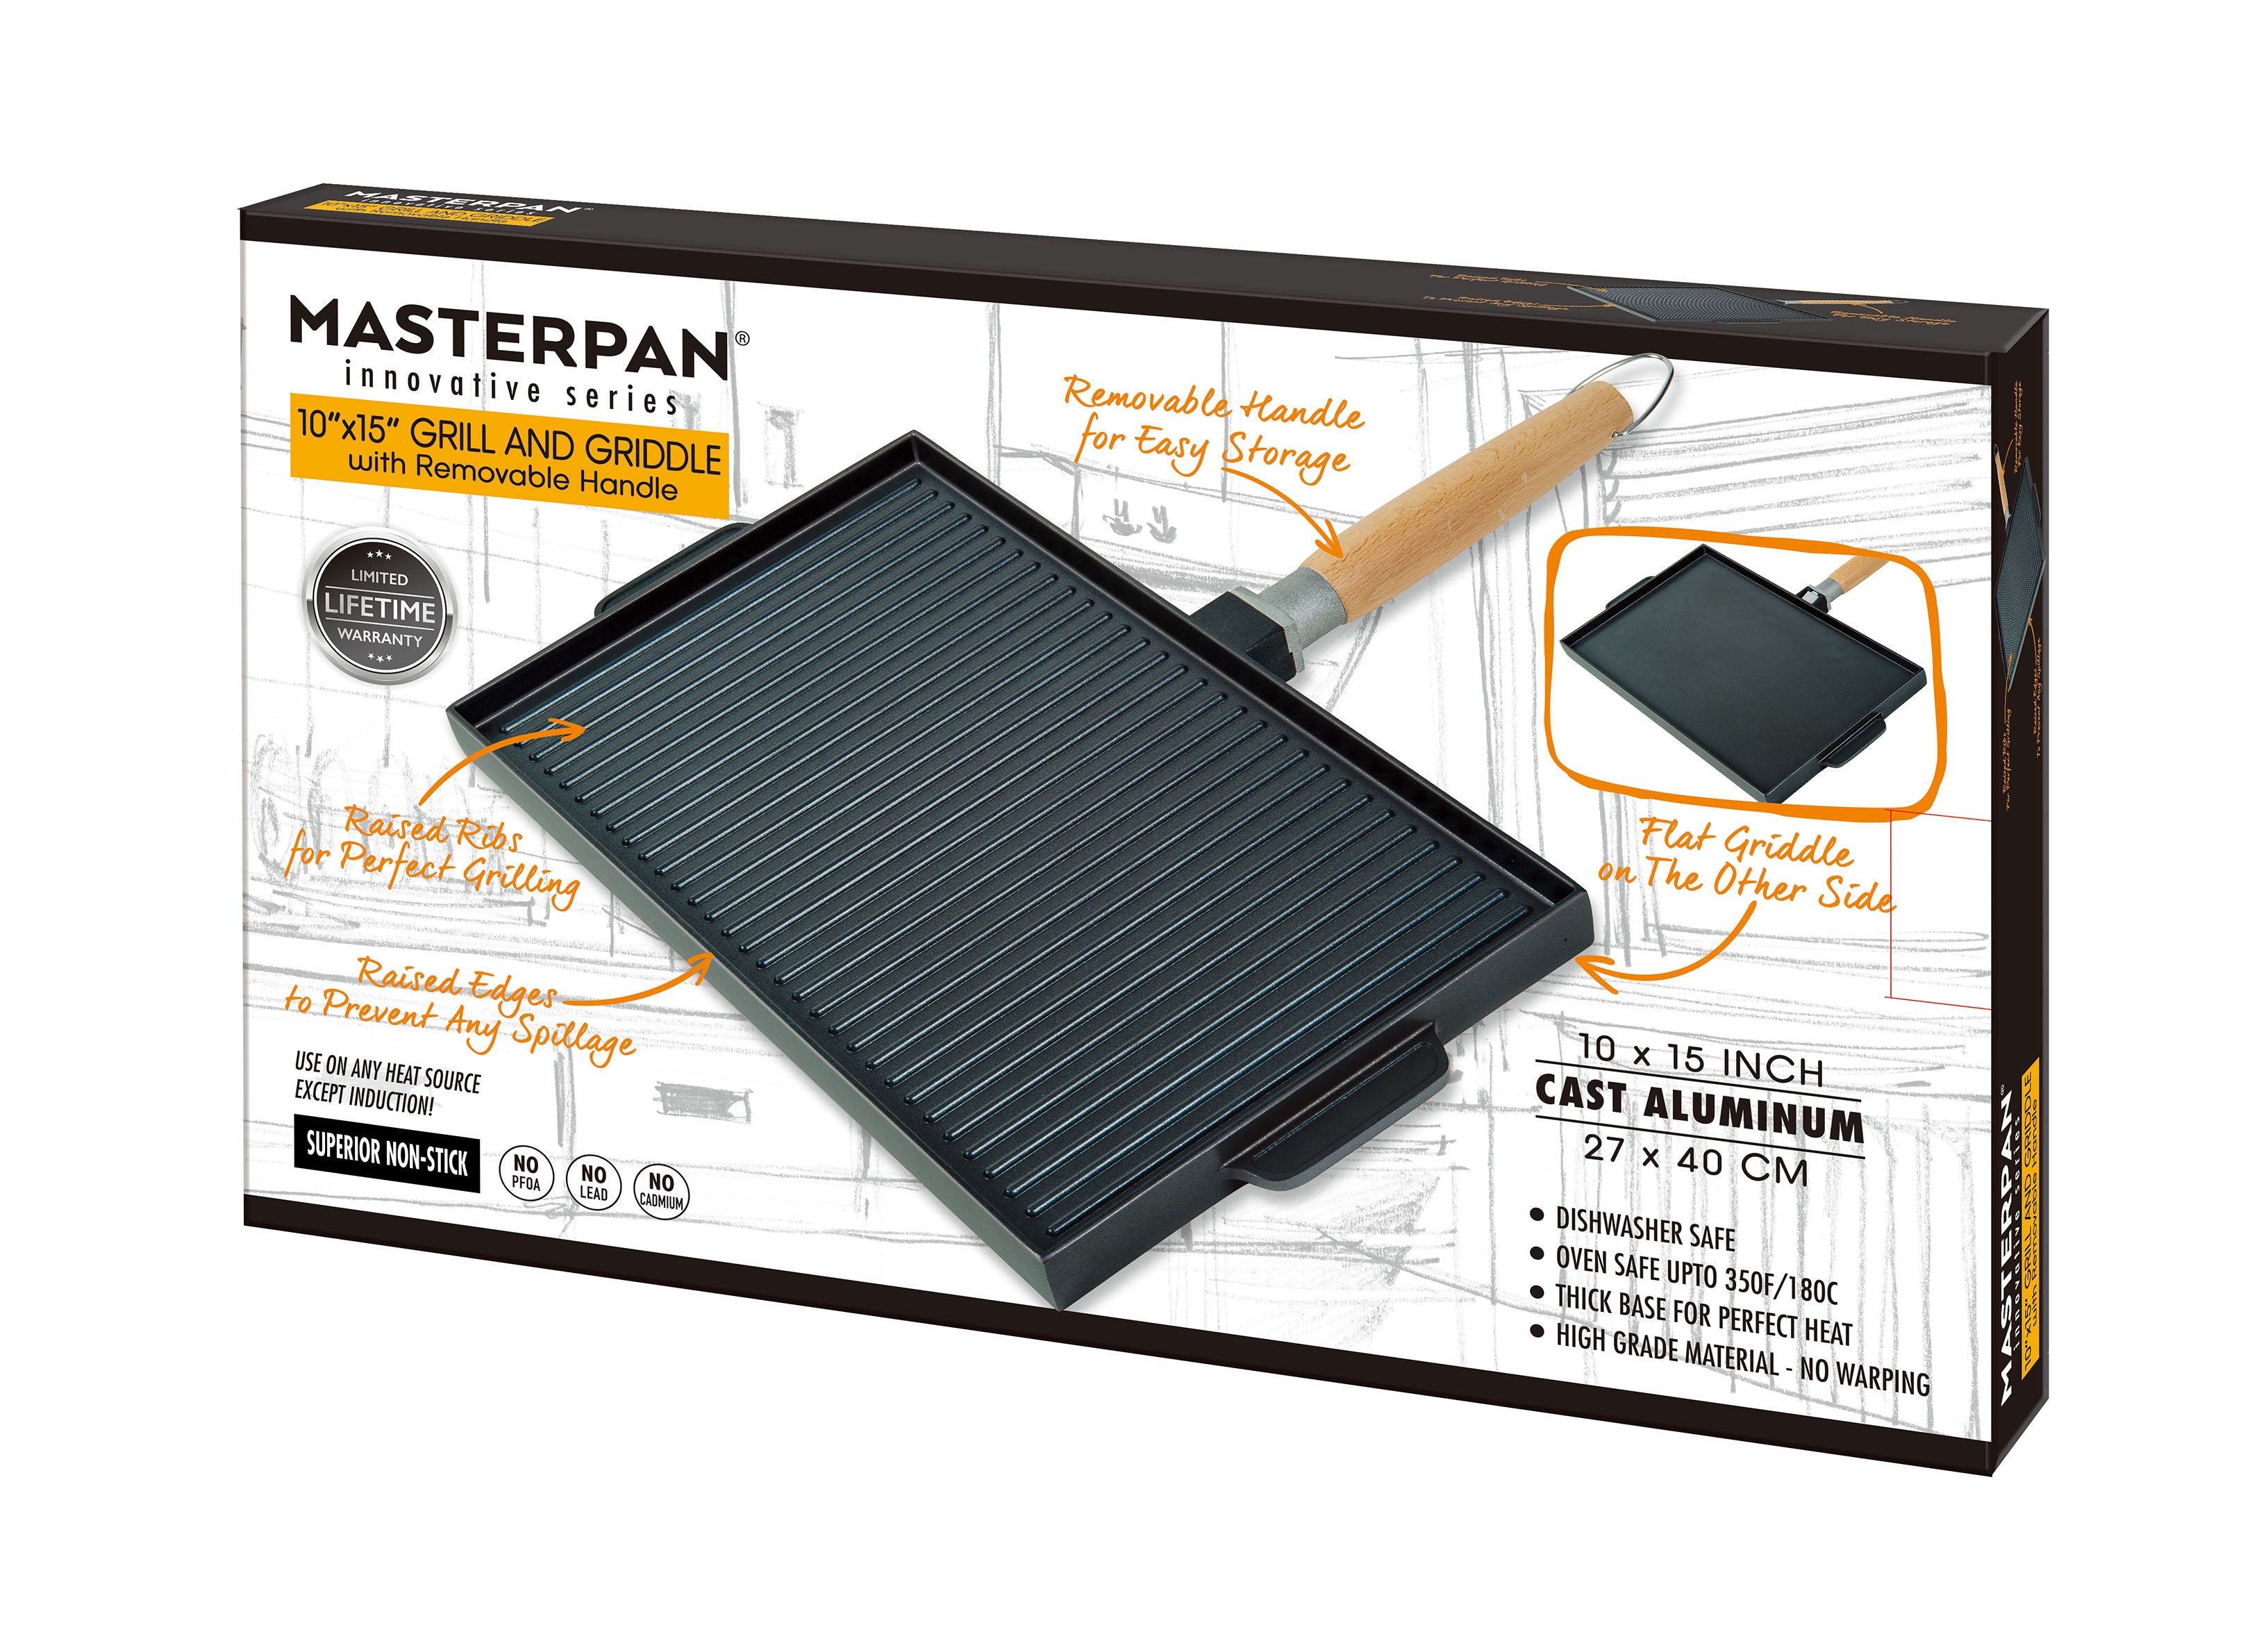 MasterPan Non-Stick Grill and Griddle Pan with Removable Handle, 15  (Innovative Series), black and Brown